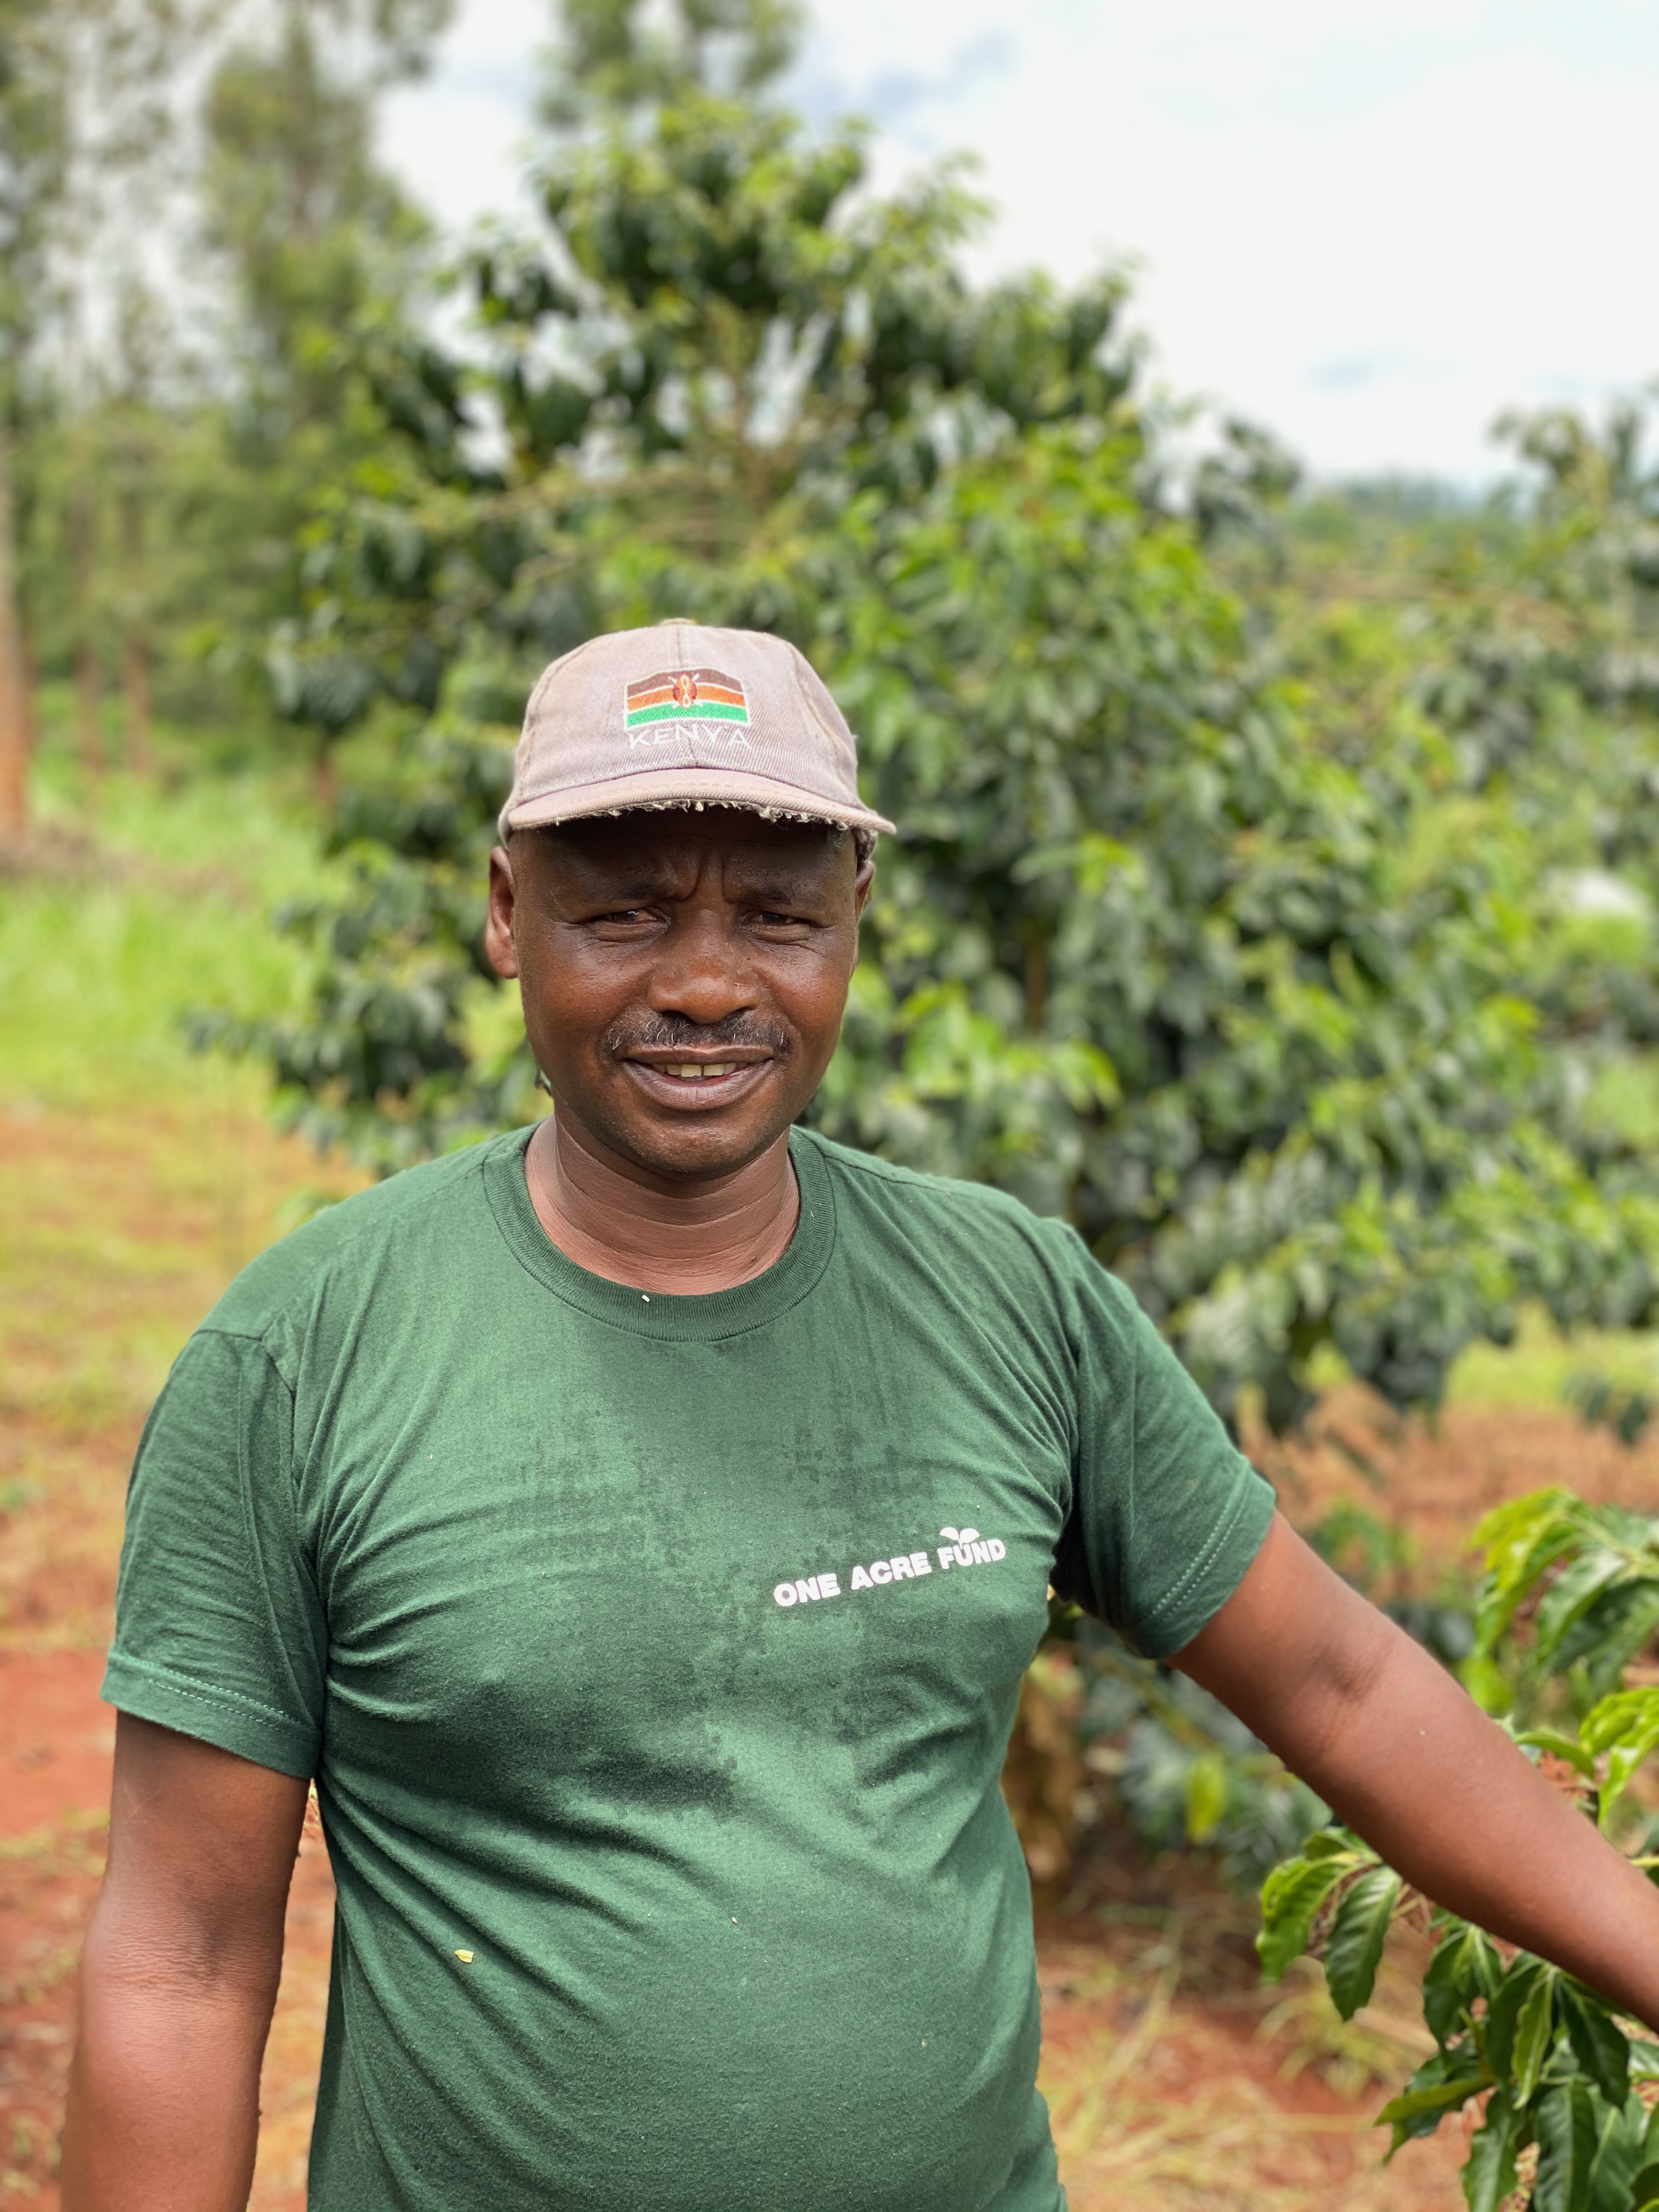 Joseph Ngari is one of the Kieni farmers we visit every year